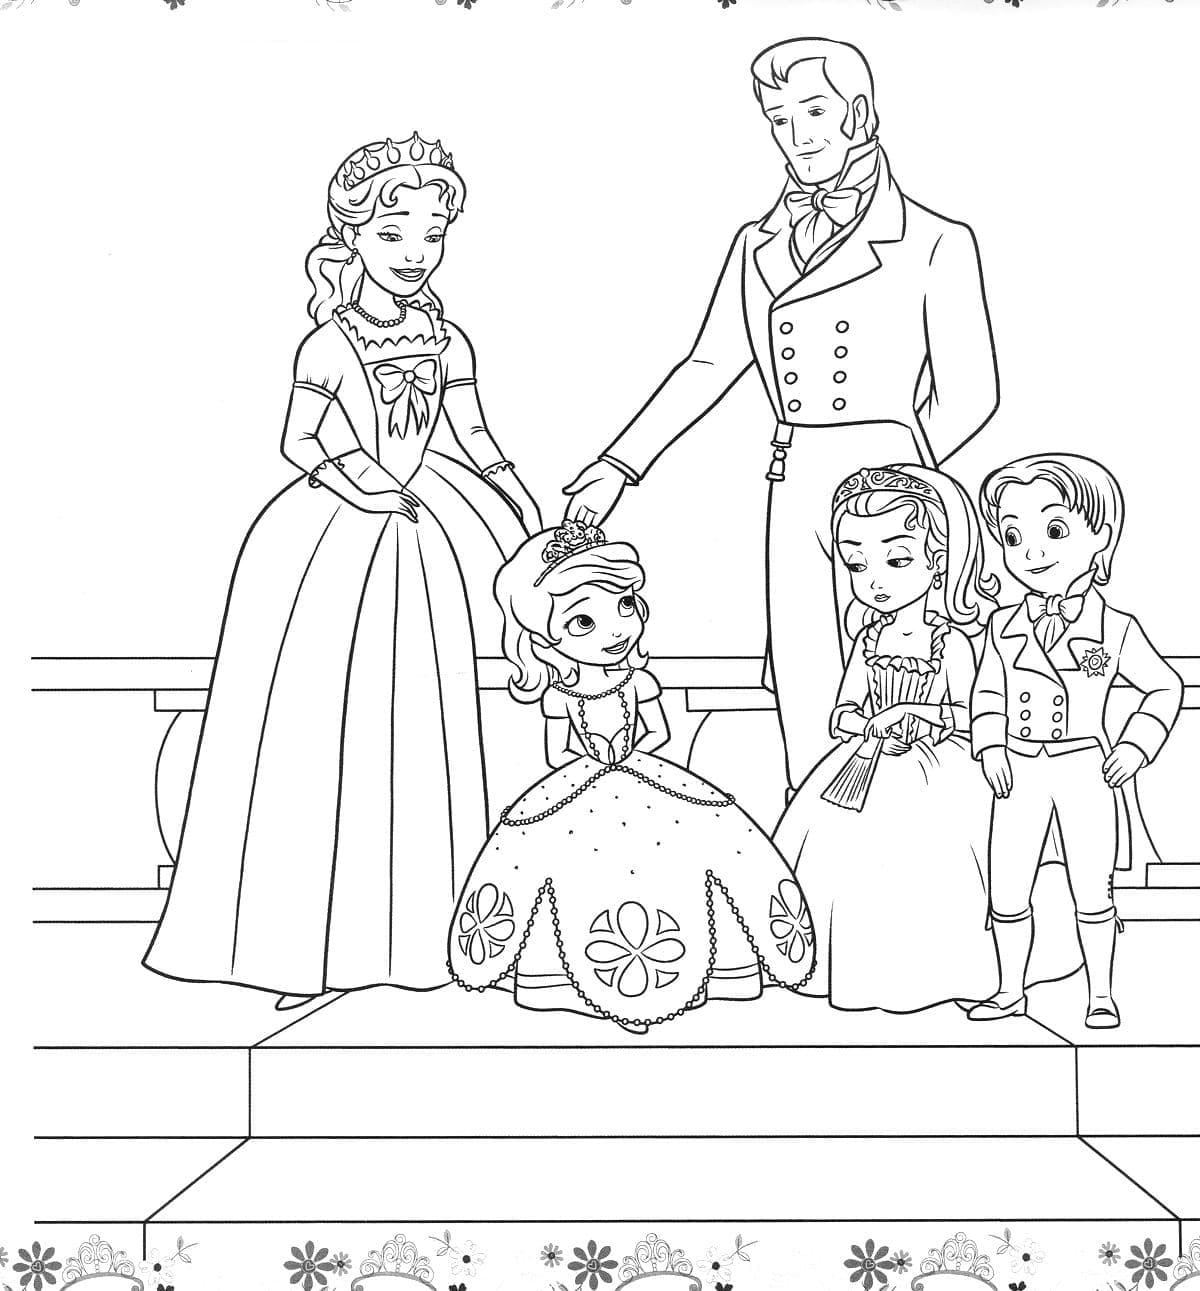 Sofia the First Characters coloring page - Download, Print or Color ...